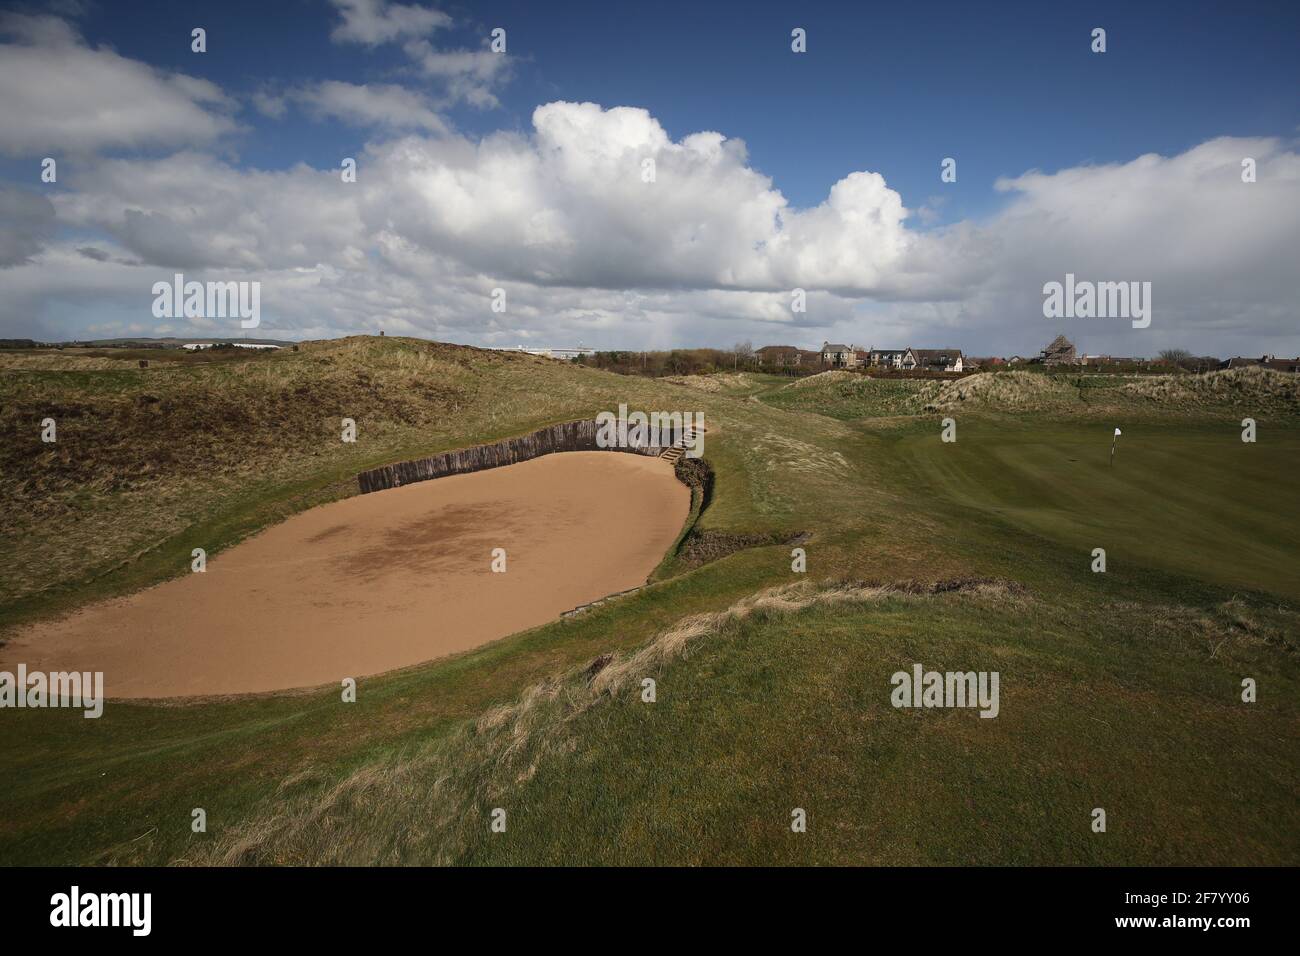 Scotland, Ayrshire, Prestwick, 09 April 2021 .  Prestwick Old Course where the first Open Golf Championship was held in October 17, 1860 The 17th hole Stock Photo